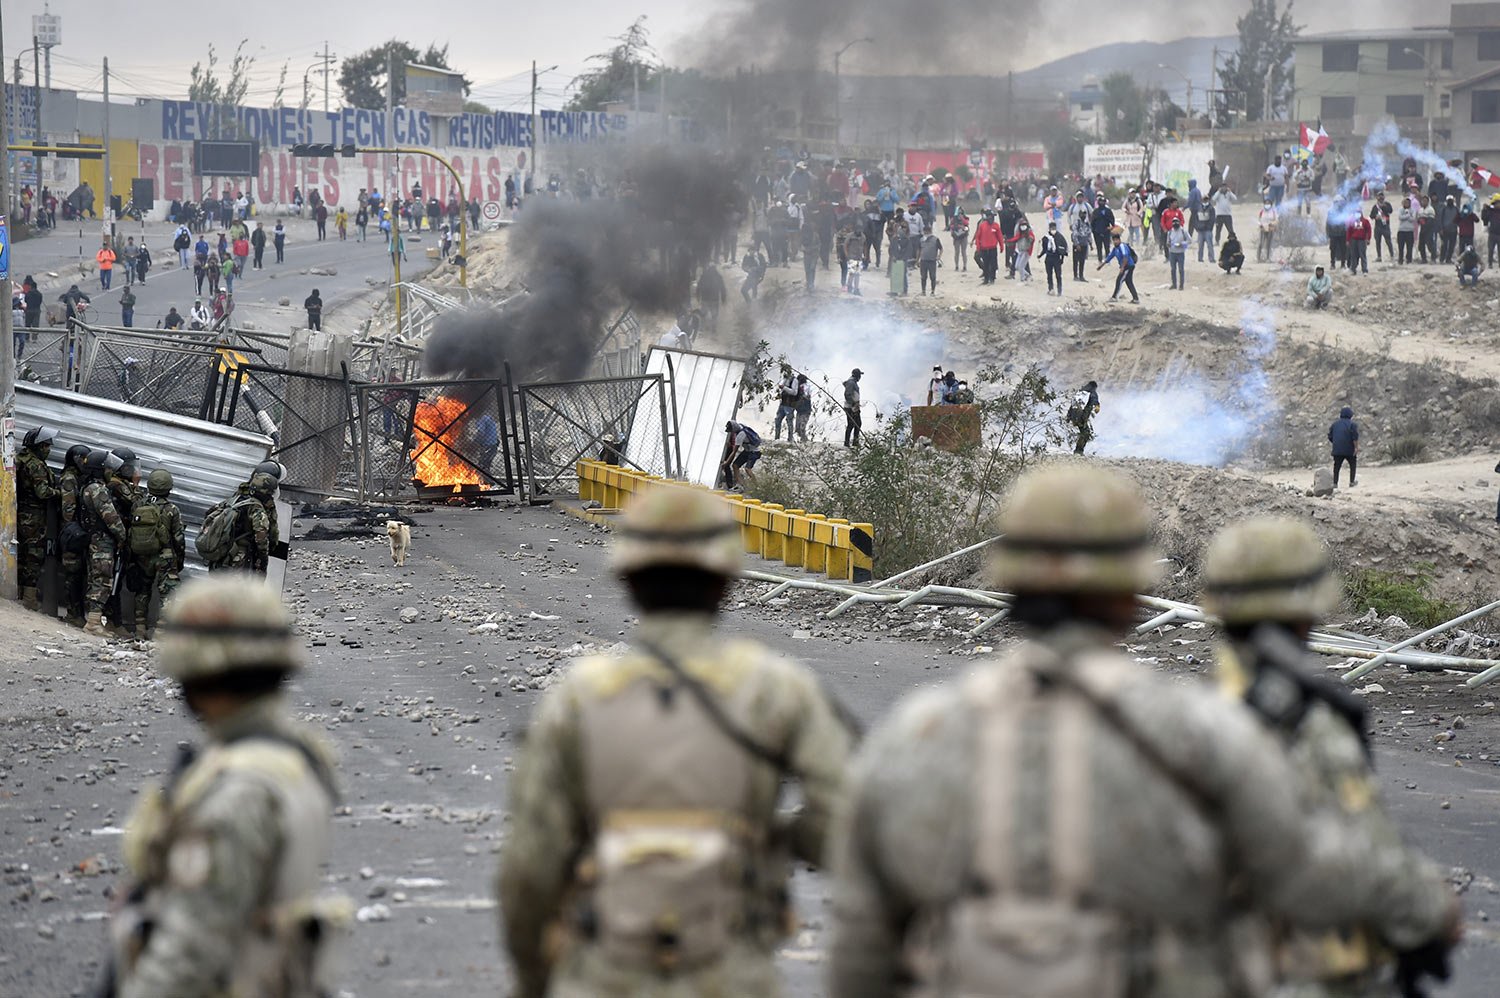  Soldiers clash with anti-government protesters outside the Alfredo Rodriguez Ballon airport in Arequipa, Peru, Jan. 20, 2023. Protesters are seeking immediate elections, President Dina Boluarte's resignation, the release of ousted President Pedro Ca